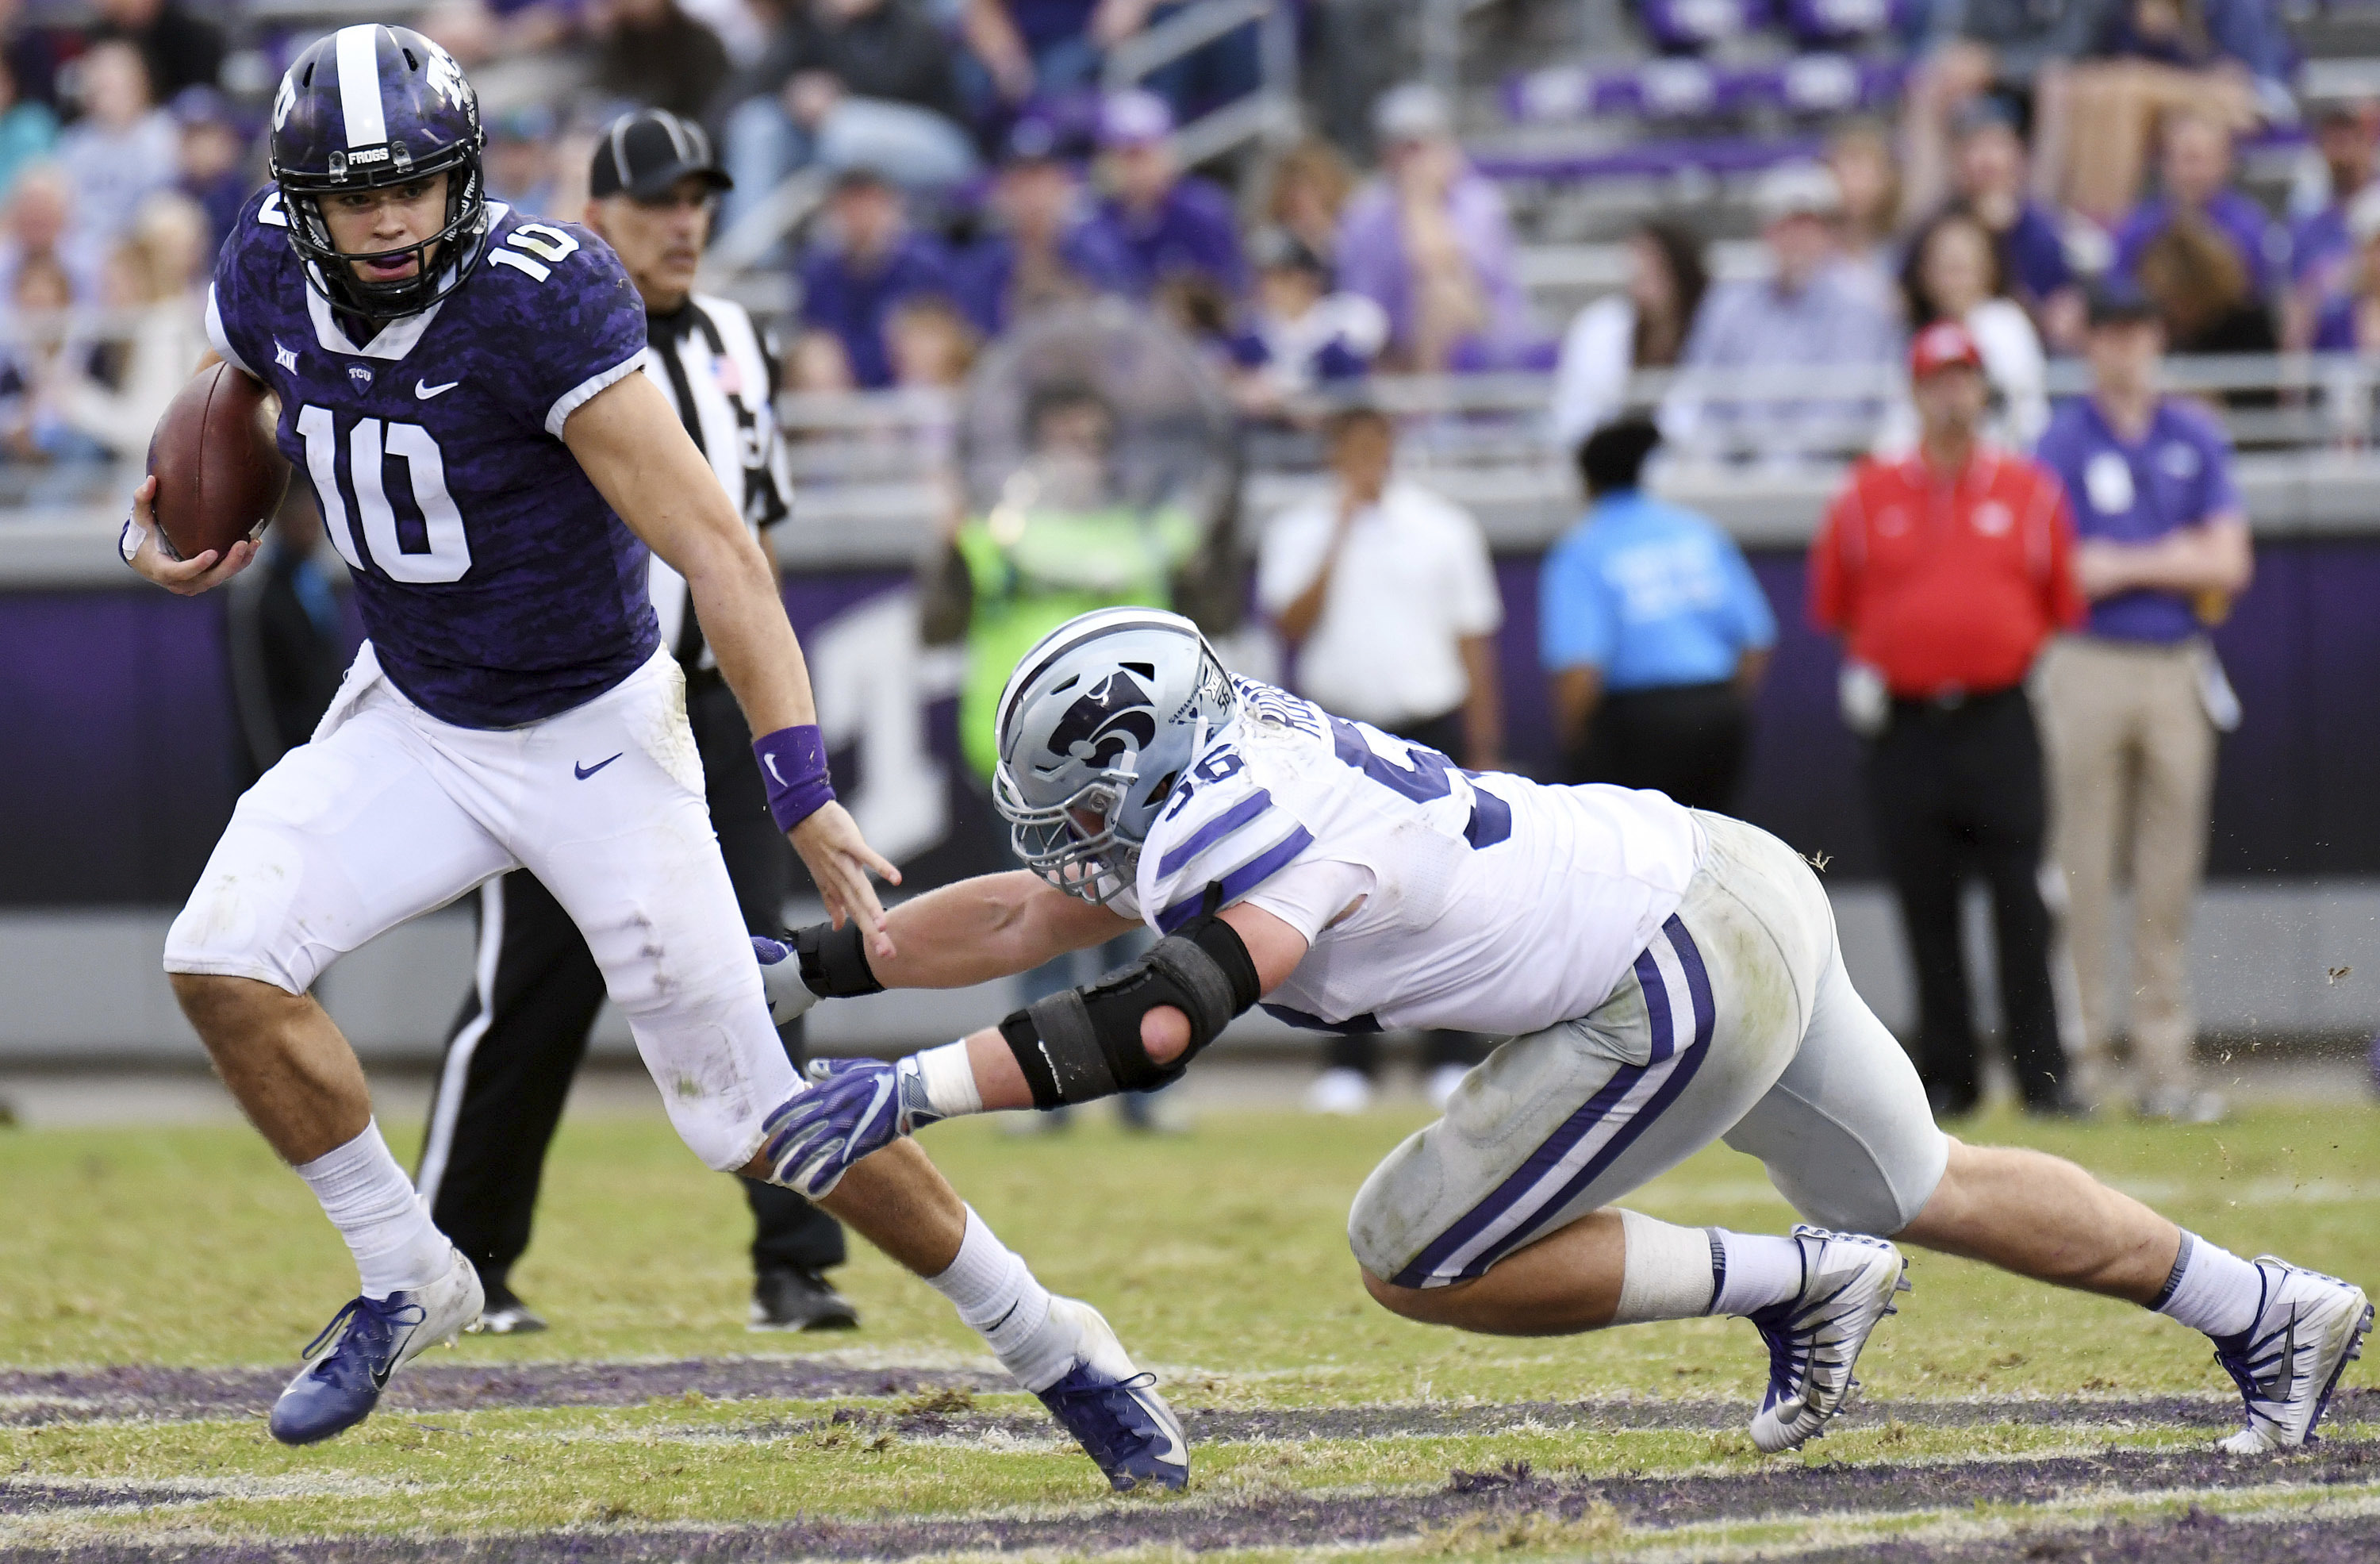 TCU hangs on for 14-13 win after K-State misses tying PAT